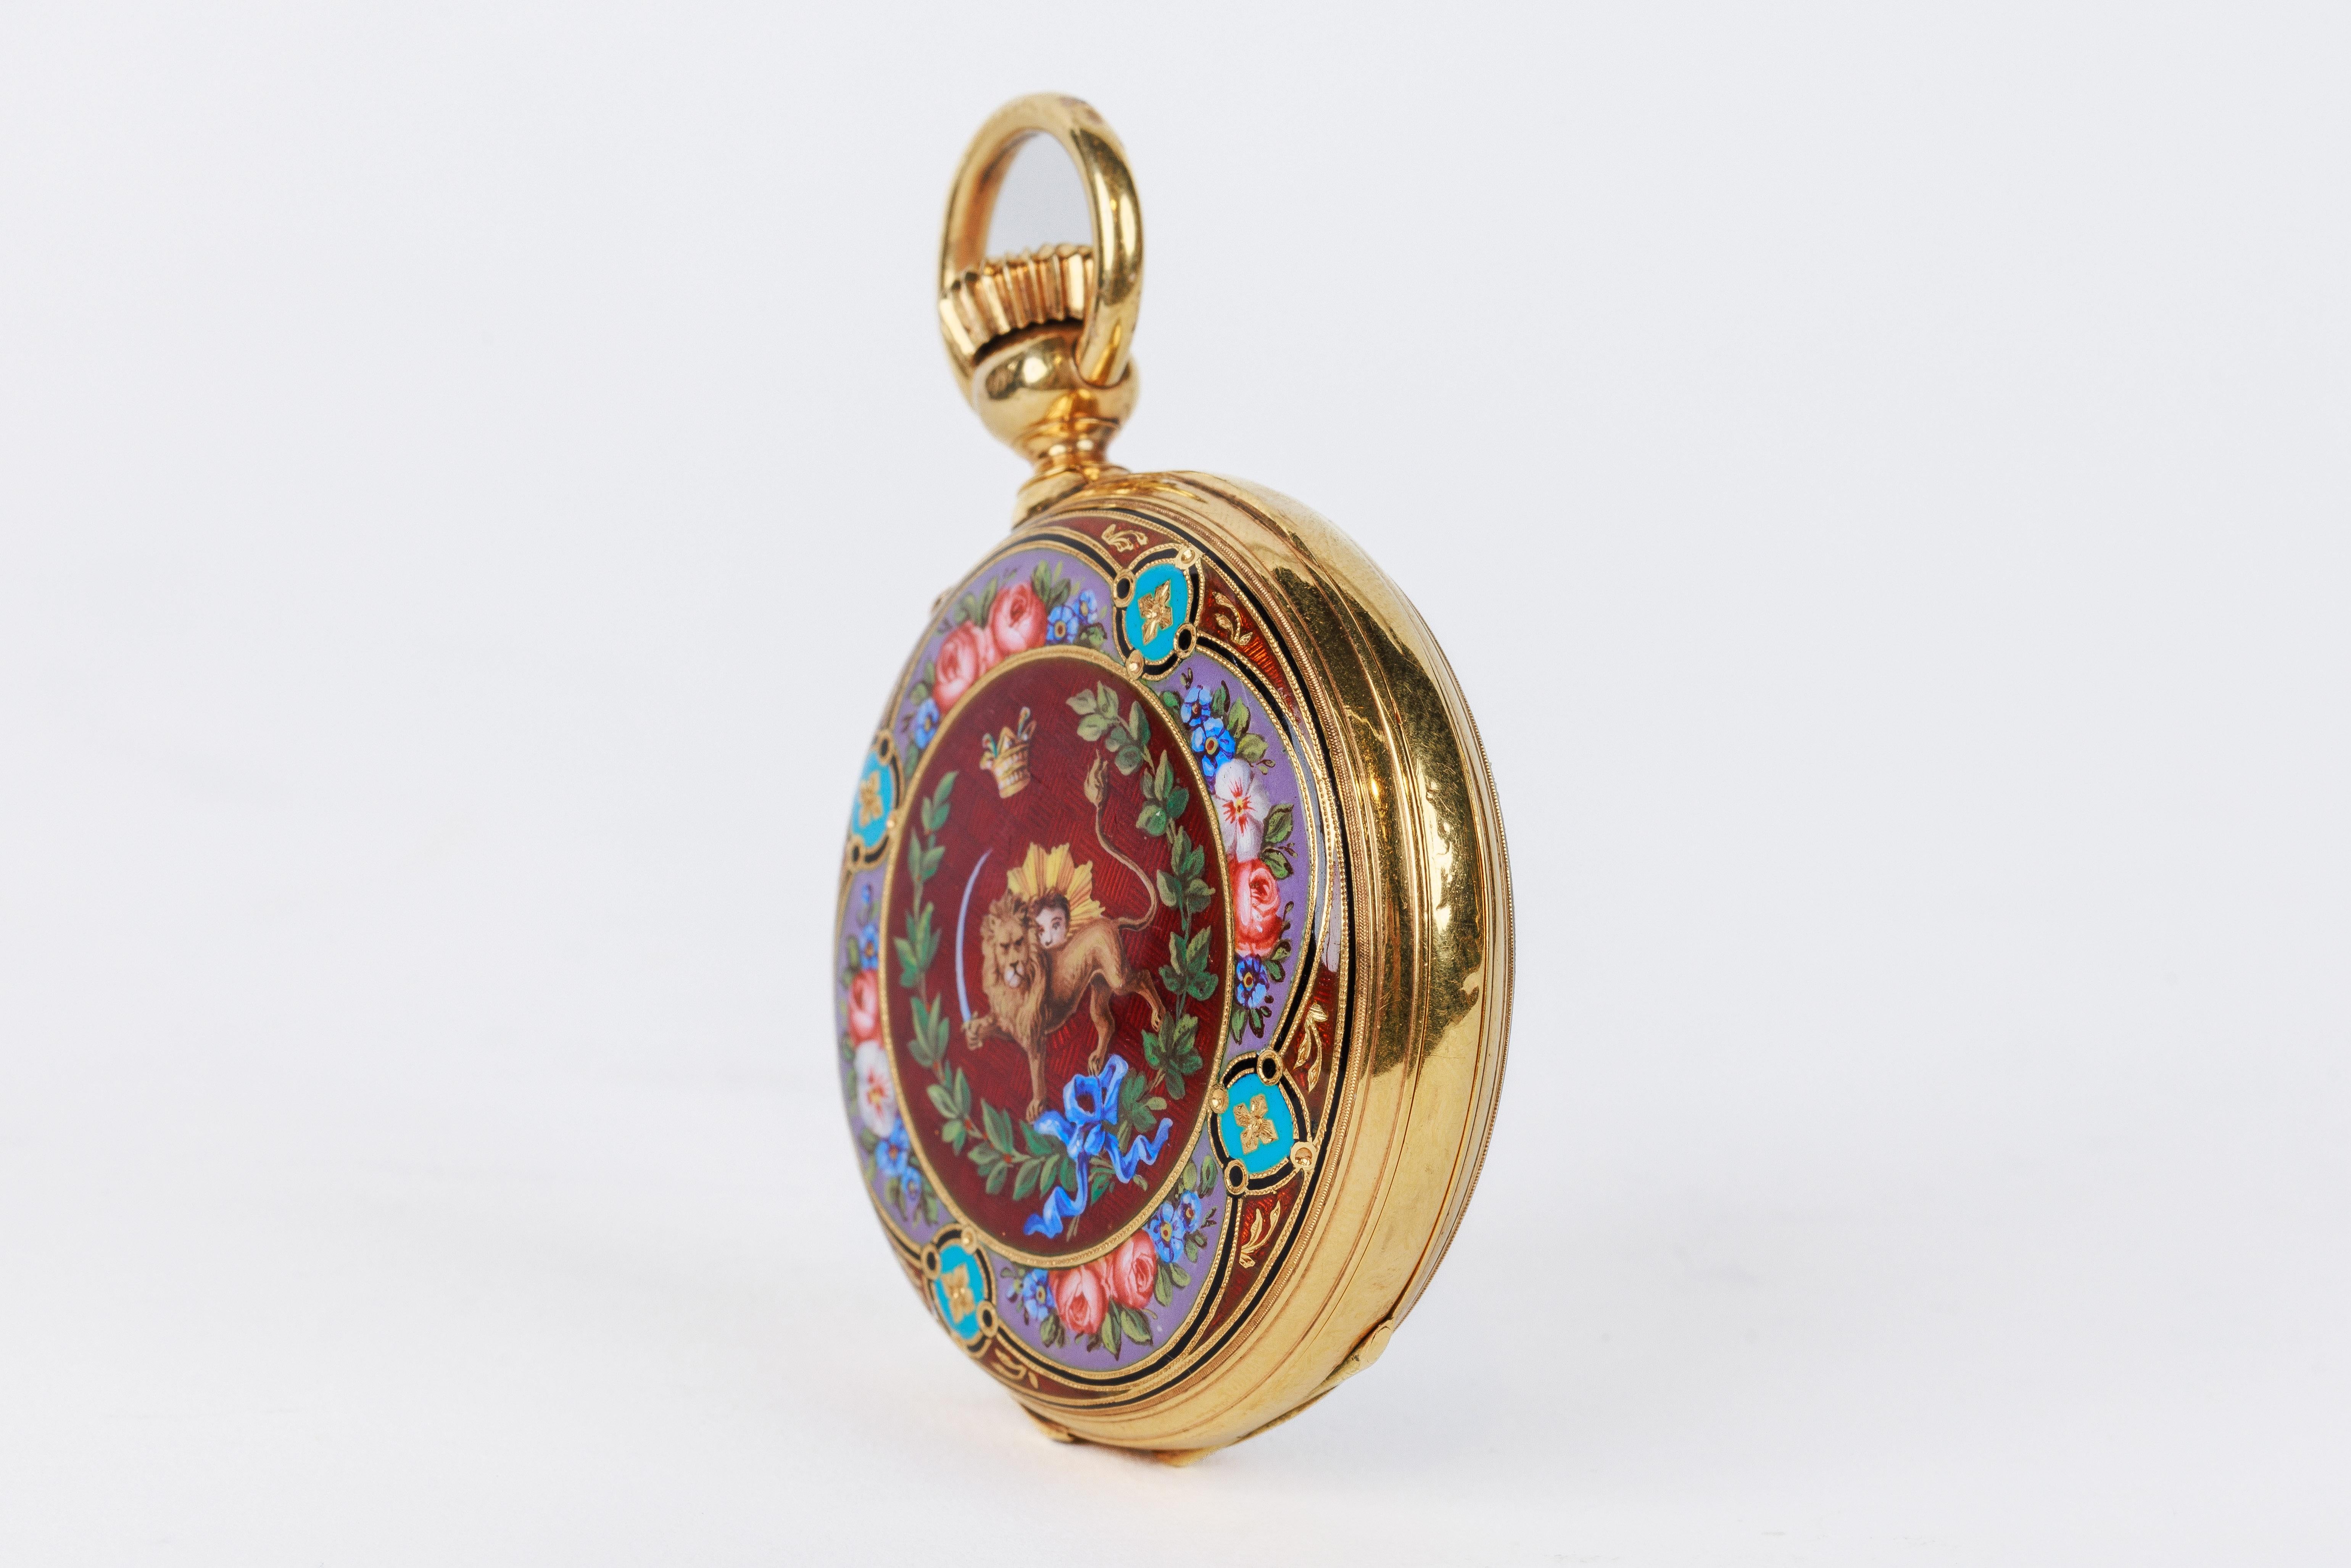 Rare Gold and Enamel Presentation Pocket Watch with Portrait of Naser Shah For Sale 12